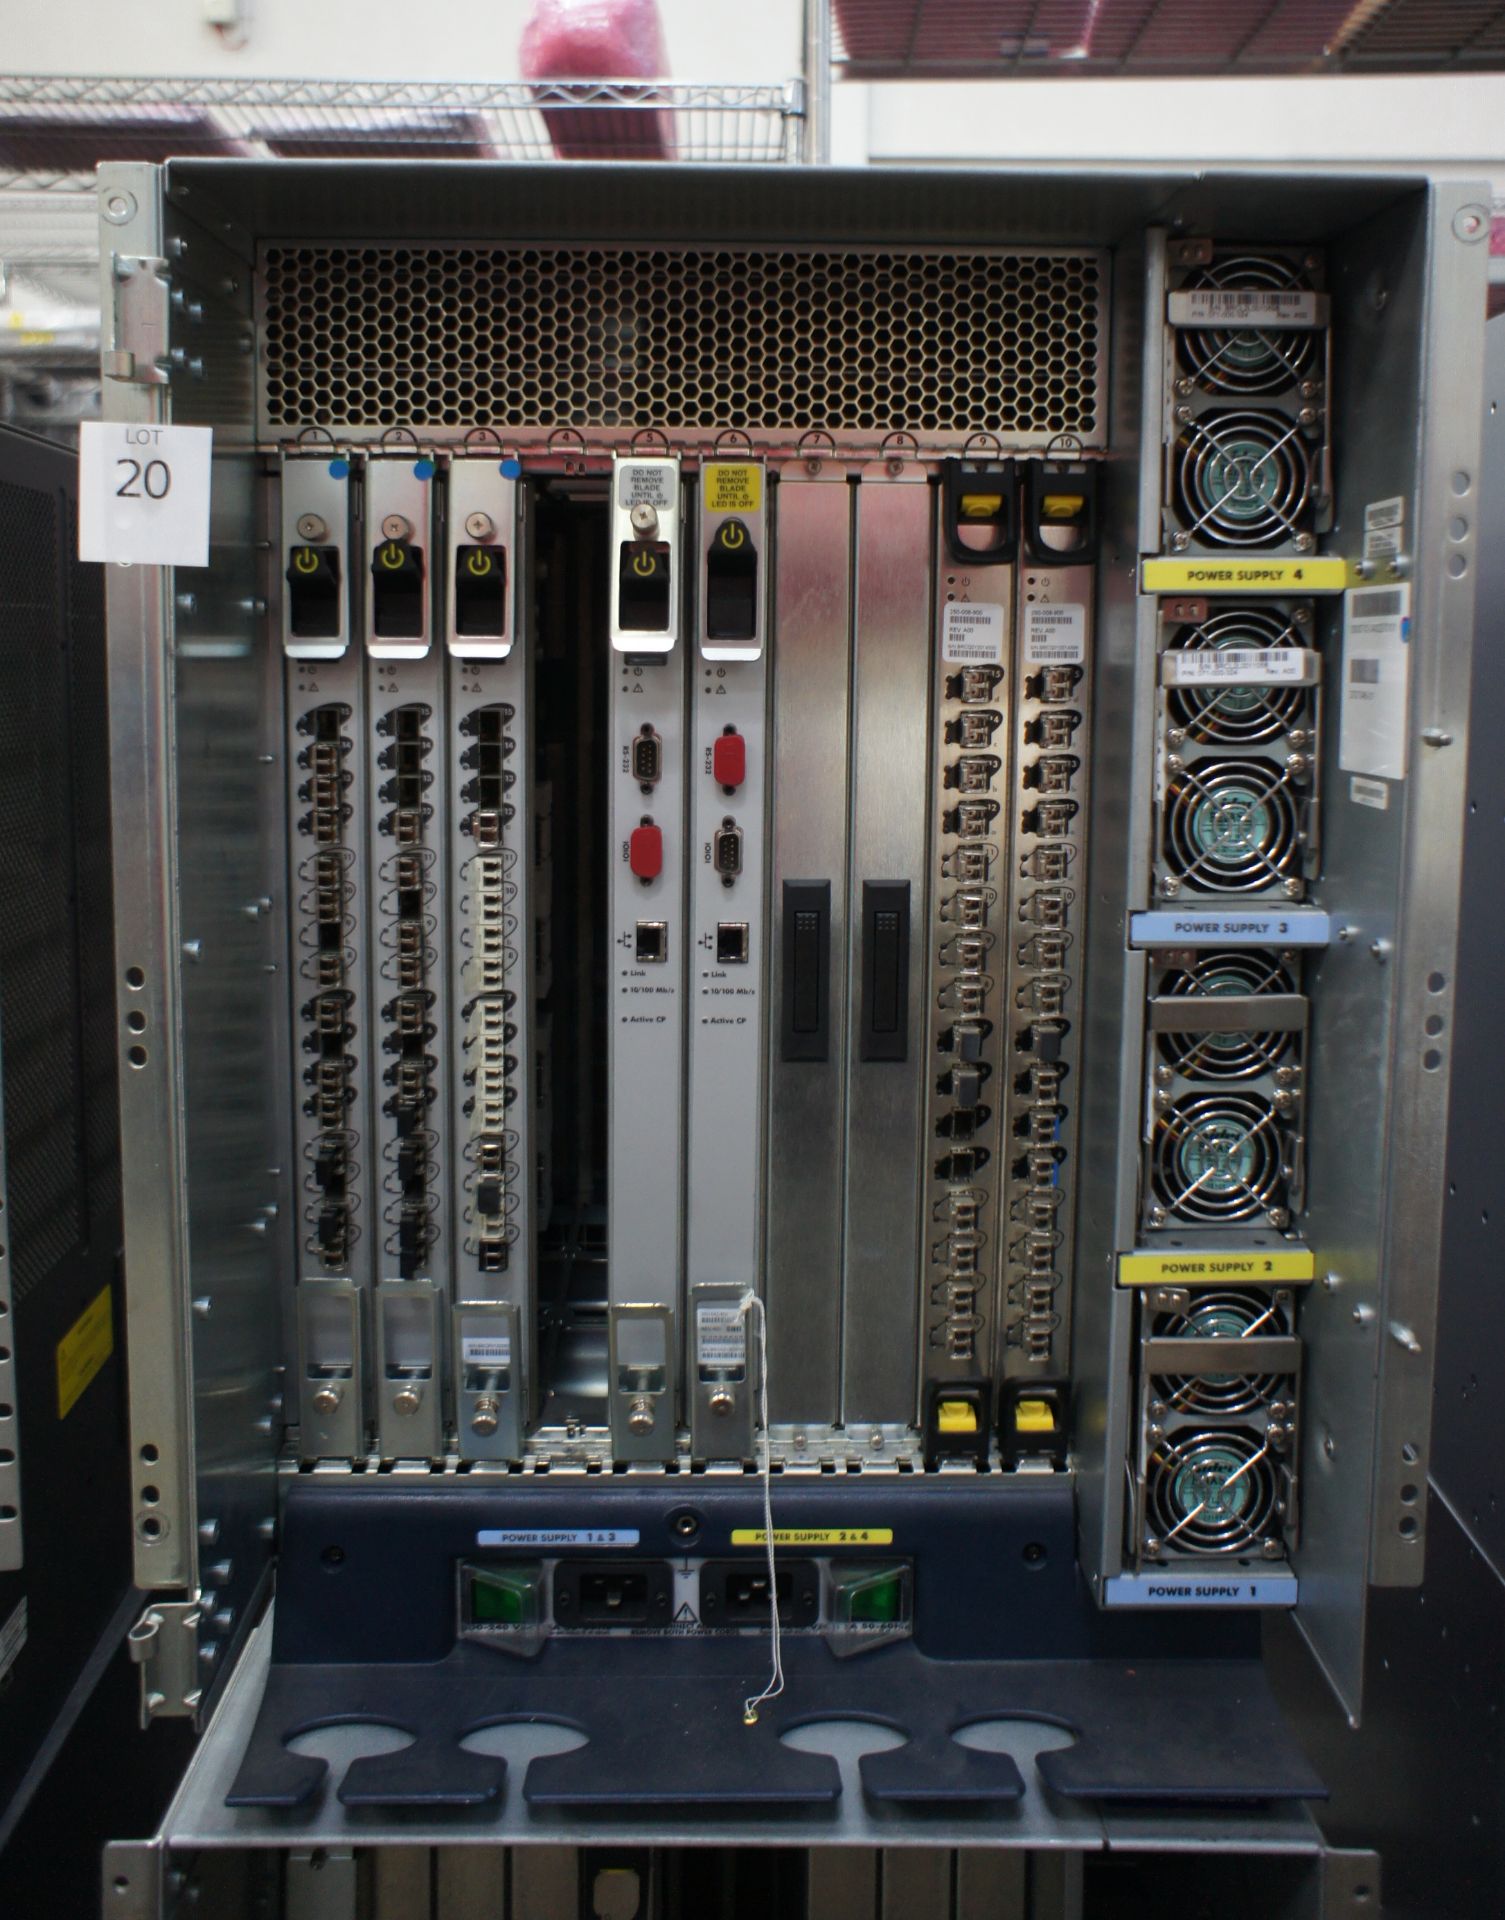 IBM2109-M48 SAN256 director cabinet with 8x FC4/32 cards and 1x CP4 cards, IBM2109-M48 SAN256 - Image 33 of 35